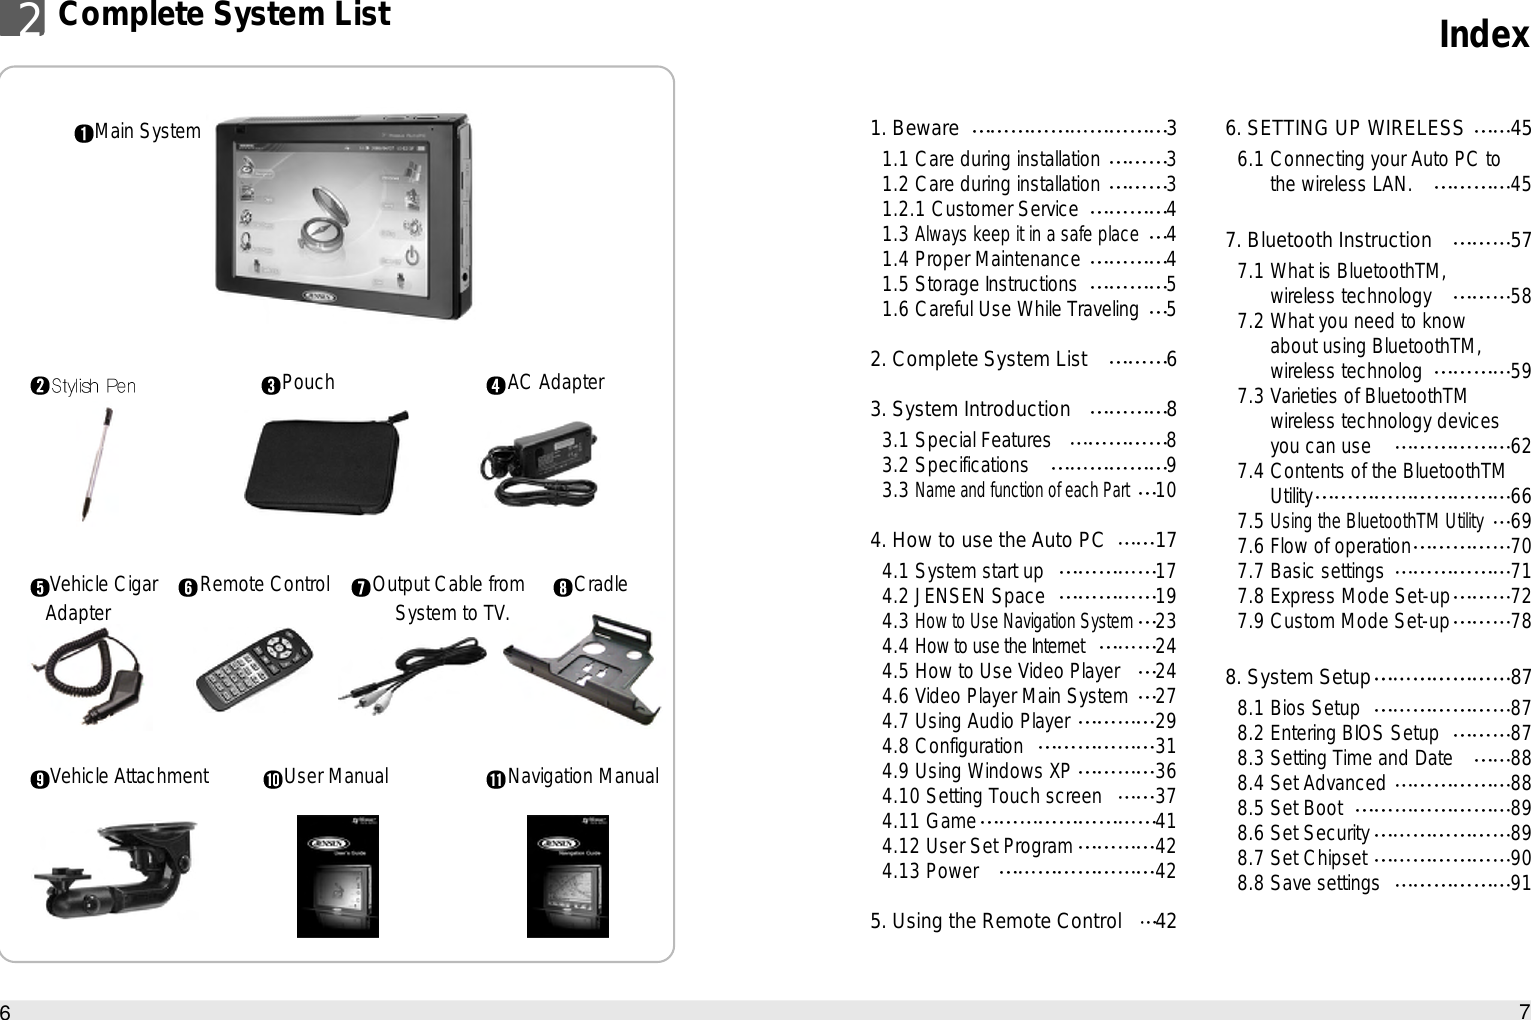 Index762Complete System ListPouch AC AdapterCradleNavigation ManualVehicle CigarAdapter Remote ControlUser ManualVehicle AttachmentMain System 1. Beware 31.1 Care during installation 31.2 Care during installation 31.2.1 Customer Service 41.3 Always keep it in a safe place41.4 Proper Maintenance 41.5 Storage Instructions 51.6 Careful Use While Traveling 52. Complete System List 63. System Introduction 83.1 Special Features 83.2 Specifications  93.3 Name and function of each Part104. How to use the Auto PC 174.1 System start up 174.2 JENSEN Space 194.3 How to Use Navigation System234.4 How to use the Internet244.5 How to Use Video Player 244.6 Video Player Main System 274.7 Using Audio Player 294.8 Configuration 314.9 Using Windows XP 364.10 Setting Touch screen 374.11 Game 414.12 User Set Program 424.13 Power 425. Using the Remote Control 426. SETTING UP WIRELESS 456.1 Connecting your Auto PC to the wireless LAN. 457. Bluetooth Instruction 577.1 What is BluetoothTM‚ wireless technology 587.2 What you need to know about using BluetoothTM‚ wireless technolog 597.3 Varieties of BluetoothTM wireless technology devices you can use  627.4 Contents of the BluetoothTM Utility 667.5 Using the BluetoothTM Utility697.6 Flow of operation 707.7 Basic settings 717.8 Express Mode Set-up 727.9 Custom Mode Set-up 788. System Setup 878.1 Bios Setup 878.2 Entering BIOS Setup 878.3 Setting Time and Date 888.4 Set Advanced 888.5 Set Boot 898.6 Set Security 898.7 Set Chipset 908.8 Save settings 91Output Cable fromSystem to TV.